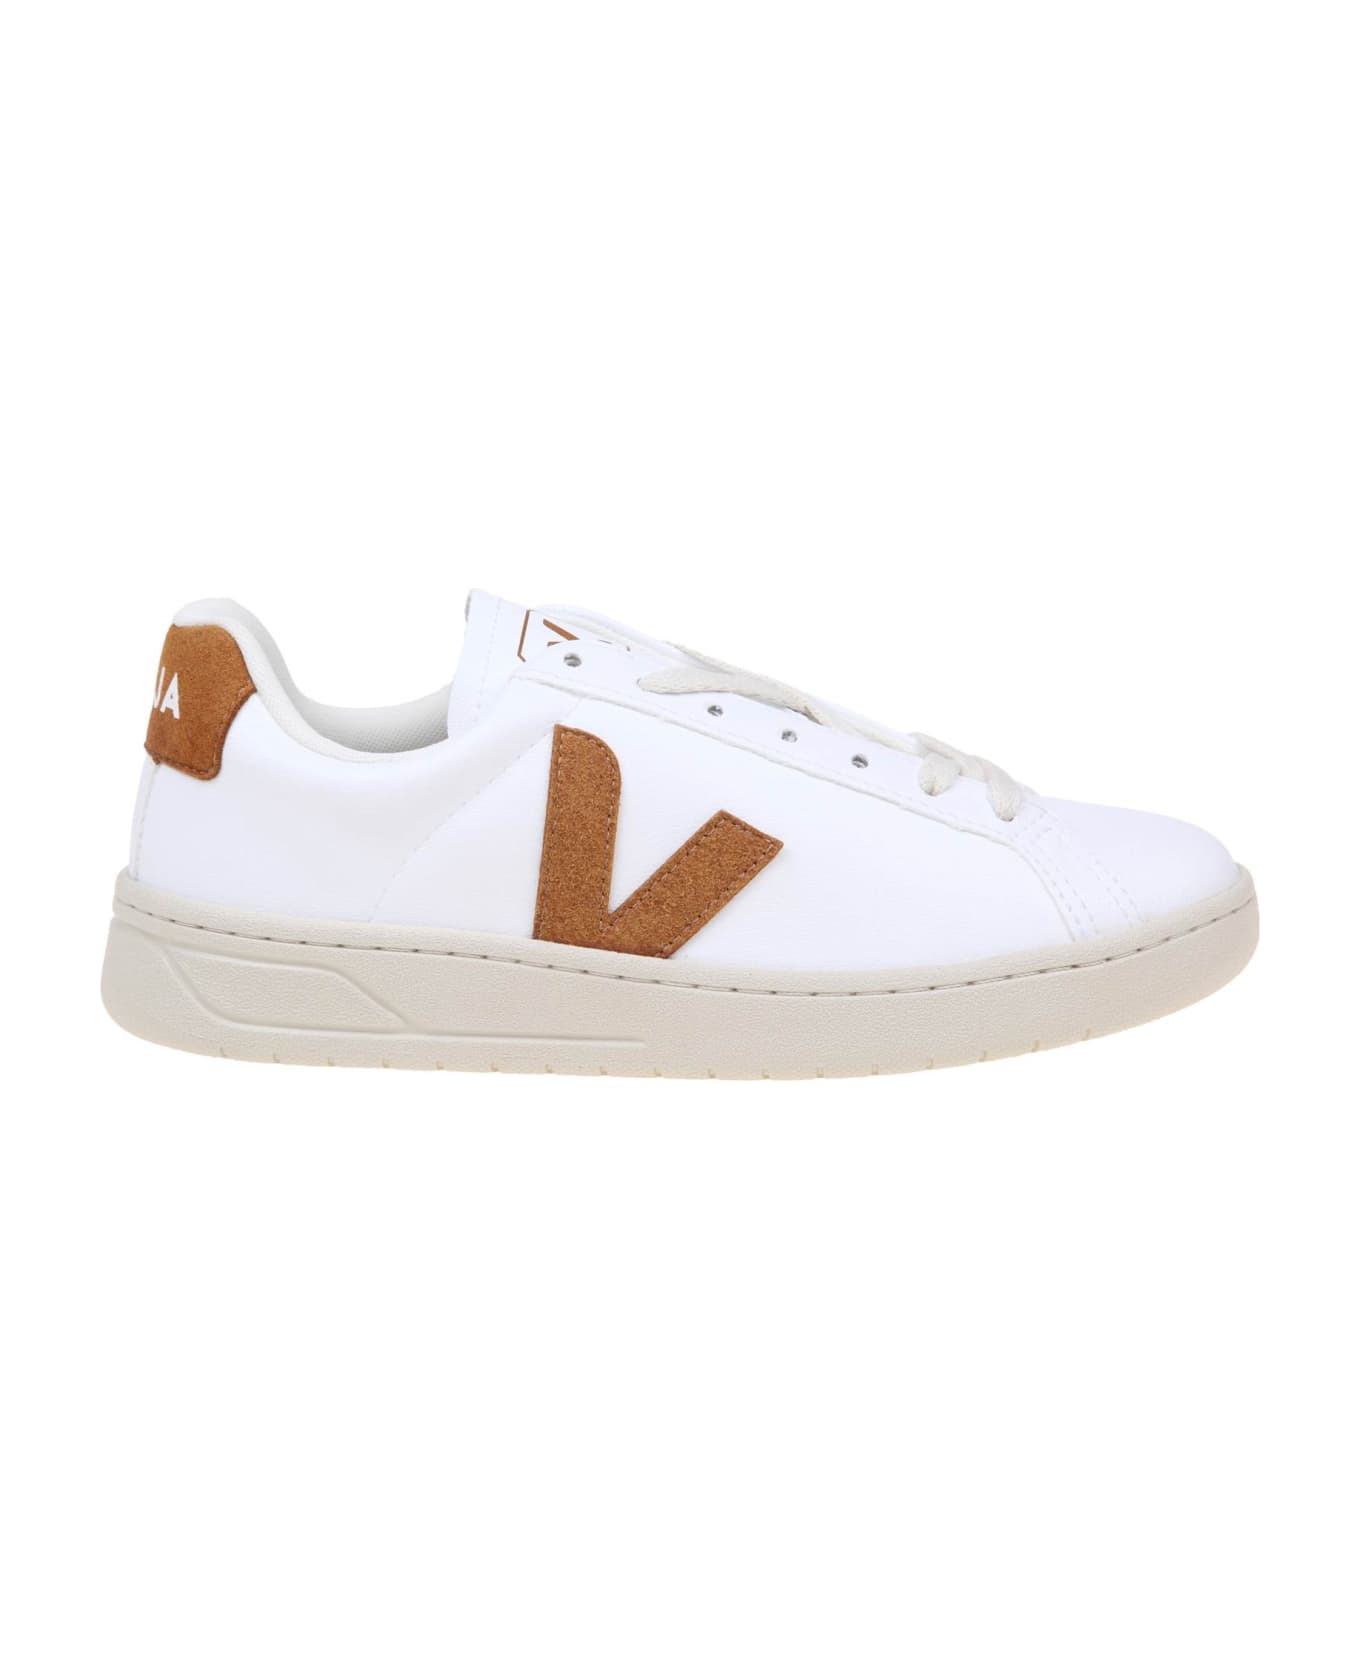 Veja Urca Sneakers In White Coated Cotton - WHITE/CAMEL